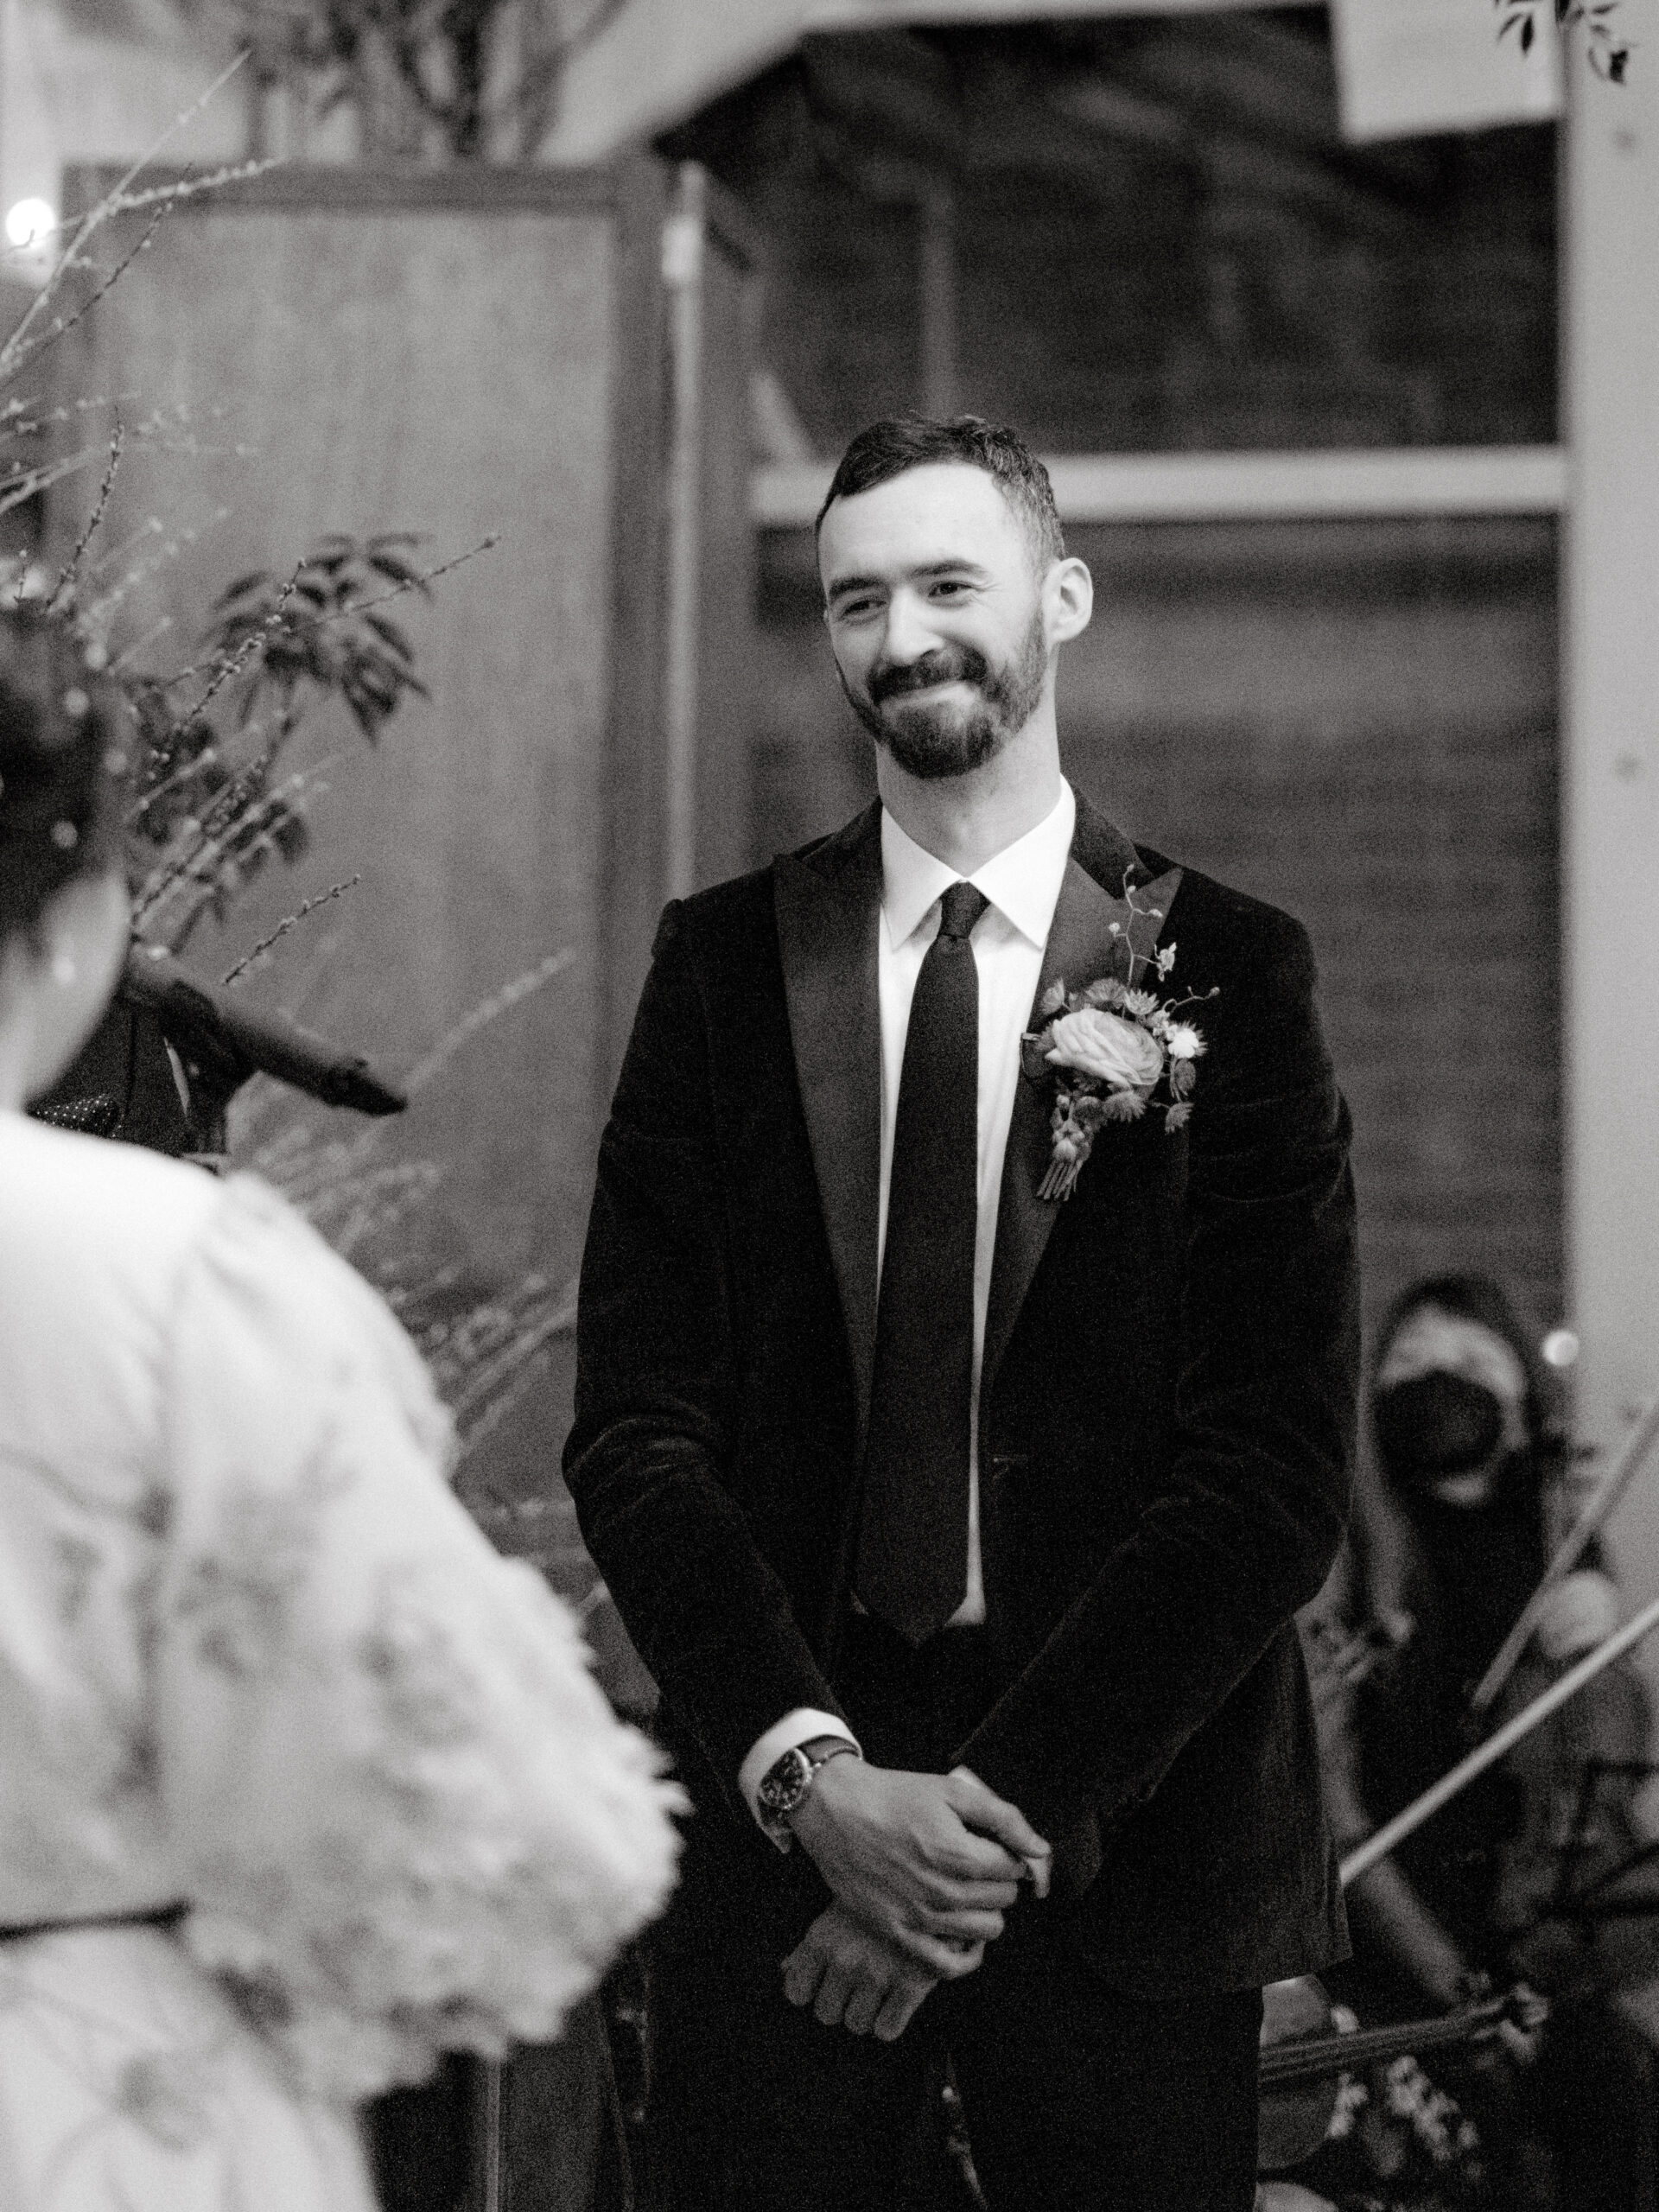 Editorial image of the groom happily looking at his bride while walking down the aisle. Capturing emotions image by Jenny Fu Studio